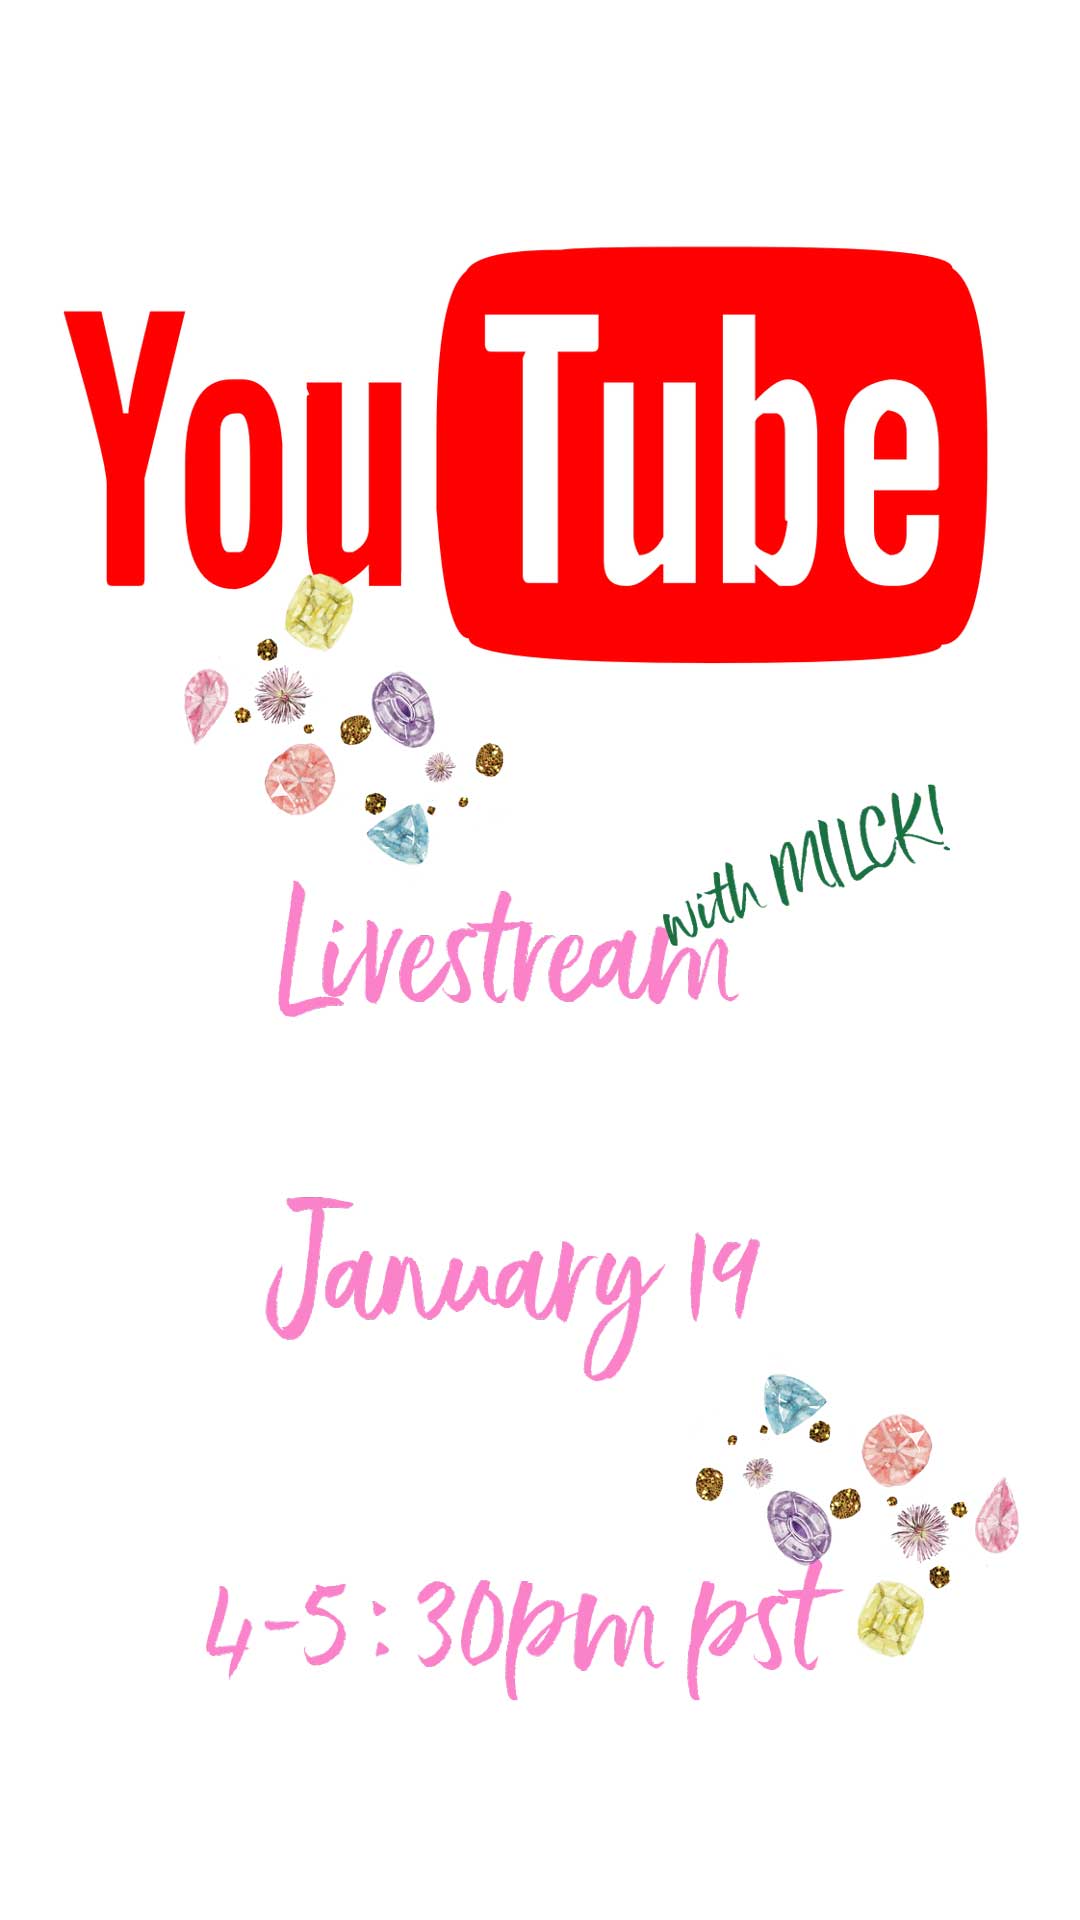 YouTube Livestream with MILCK